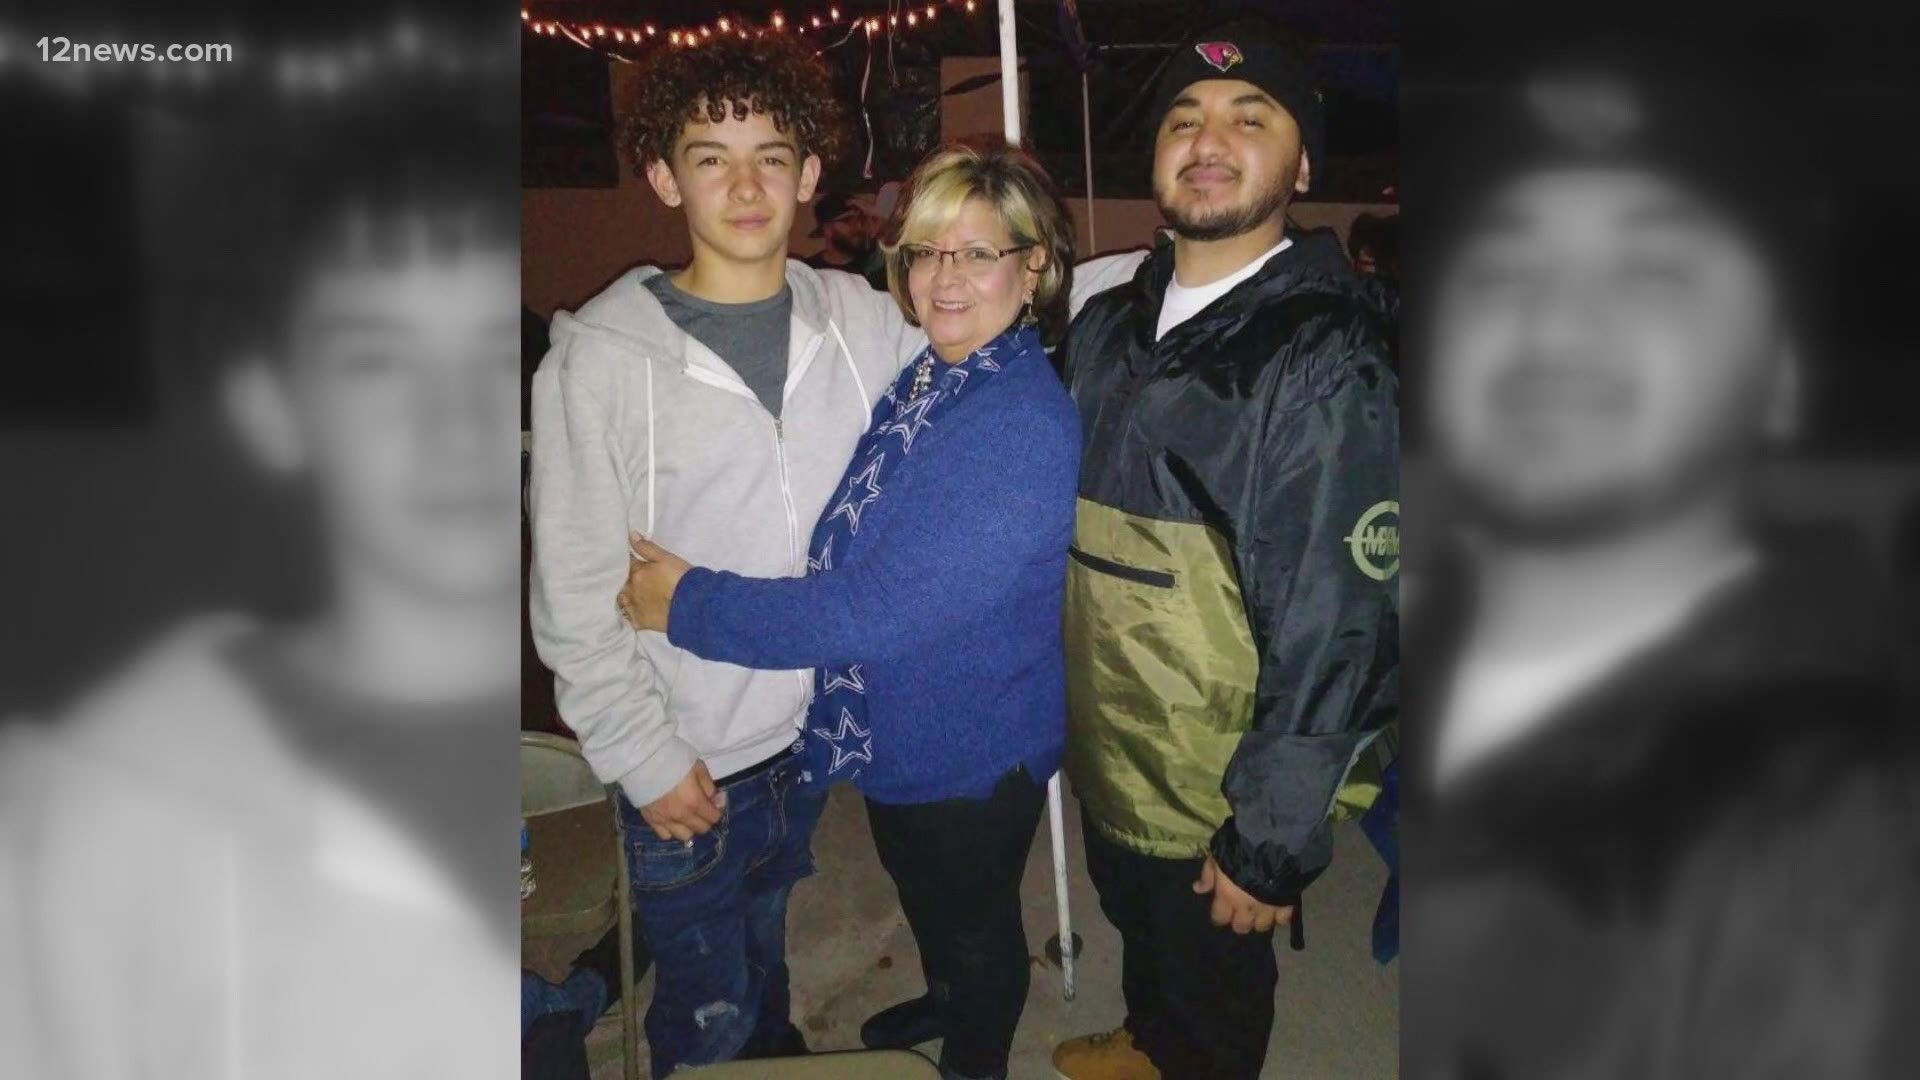 The family of a 17-year-old shot and killed by a Chandler police officer in January says the department targeted them after they called for the officer to be fired.